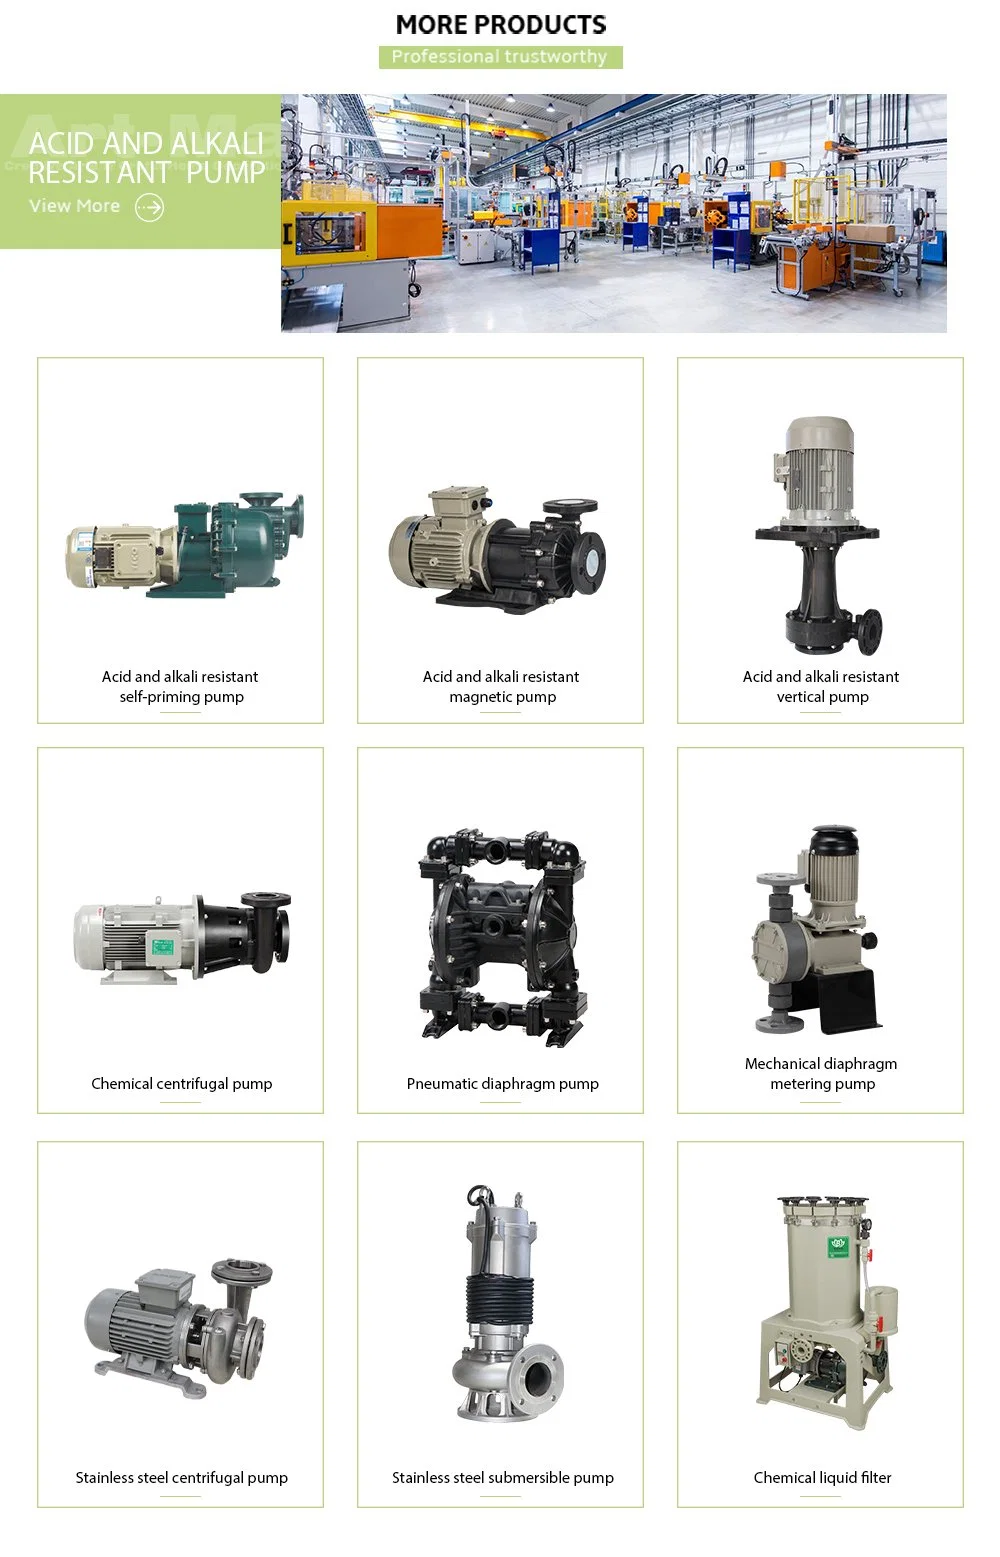 Small No Leakage Mechanical Diaphragm Metering Pump for Wastewater or Sewage Treatment